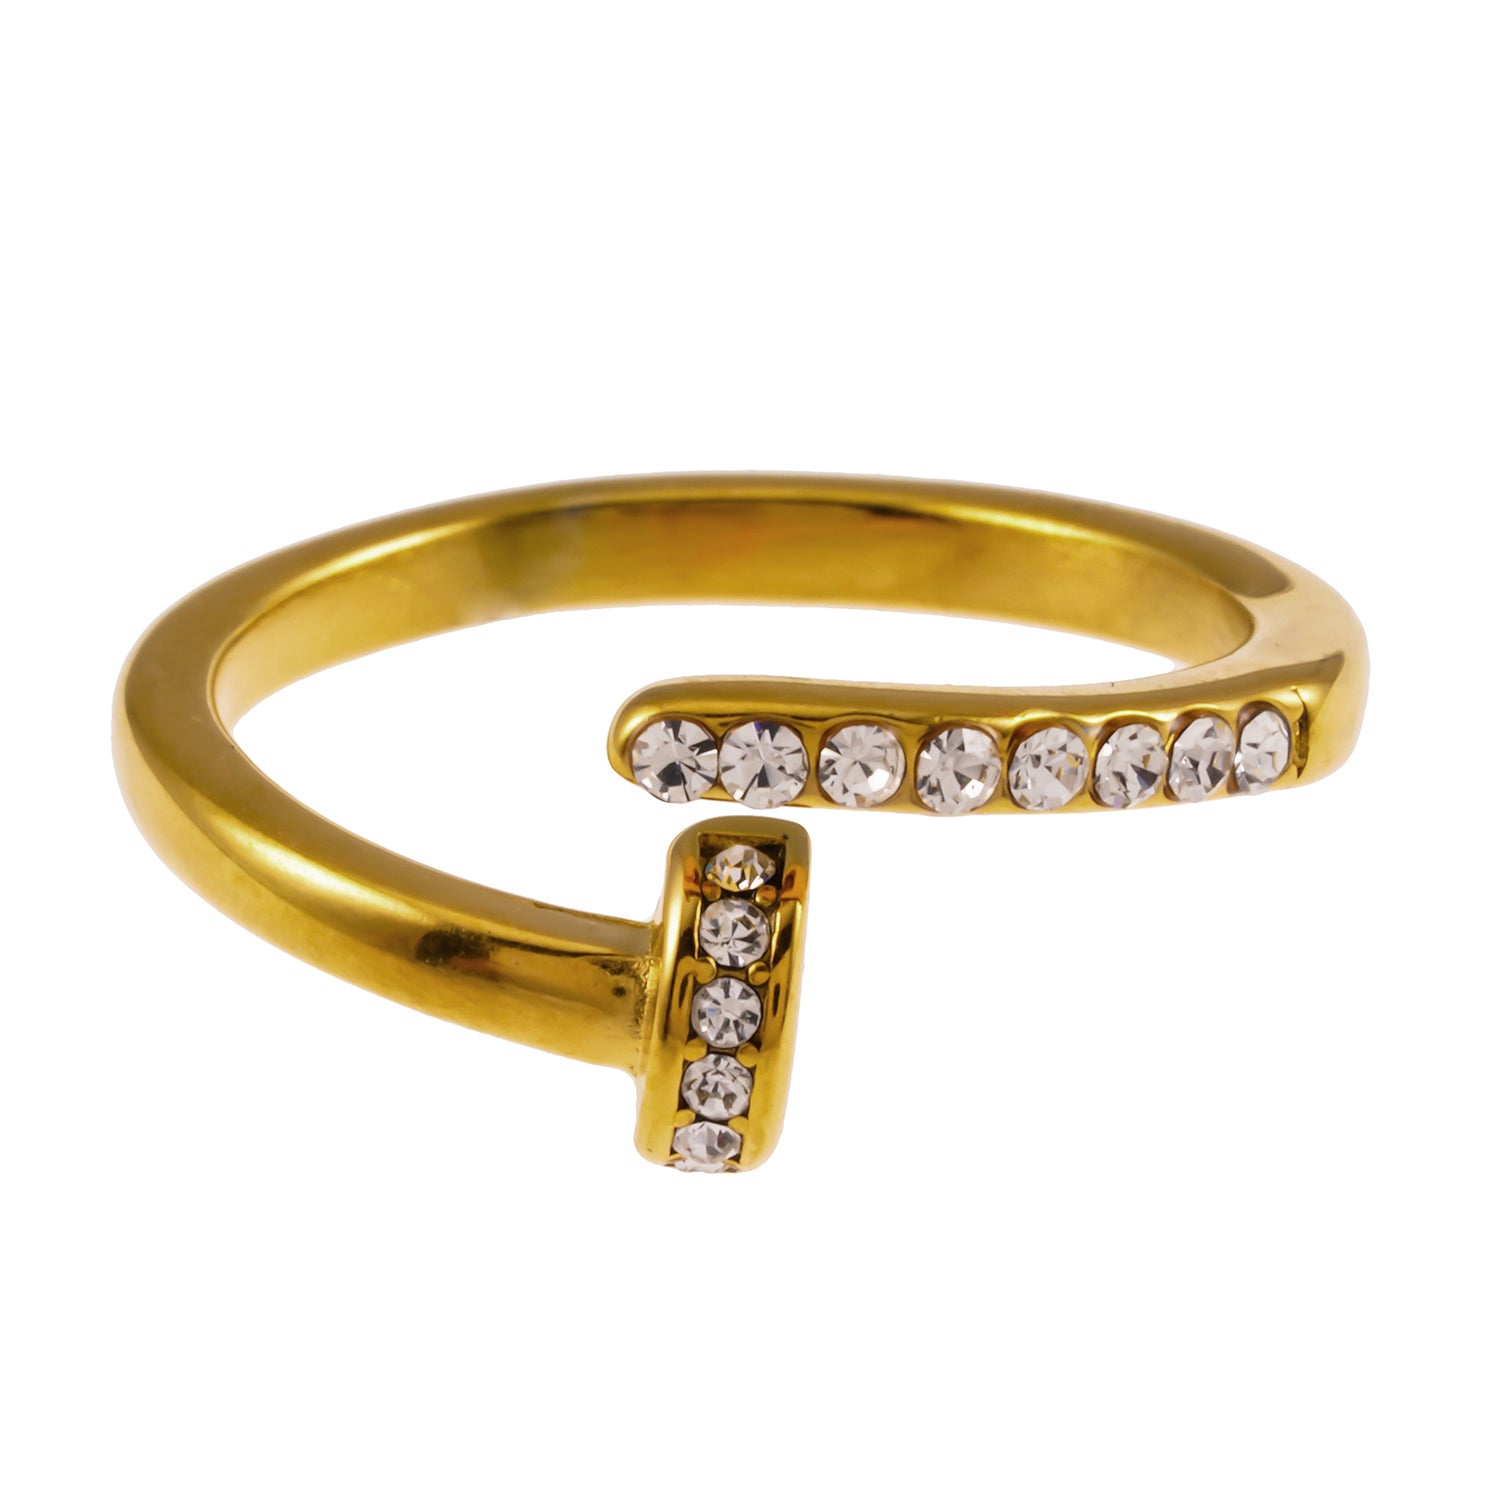 Style CHARISSE 4263: Industrial-Chic Twisted Nail Ring with Pavé Zirconia Embellishments